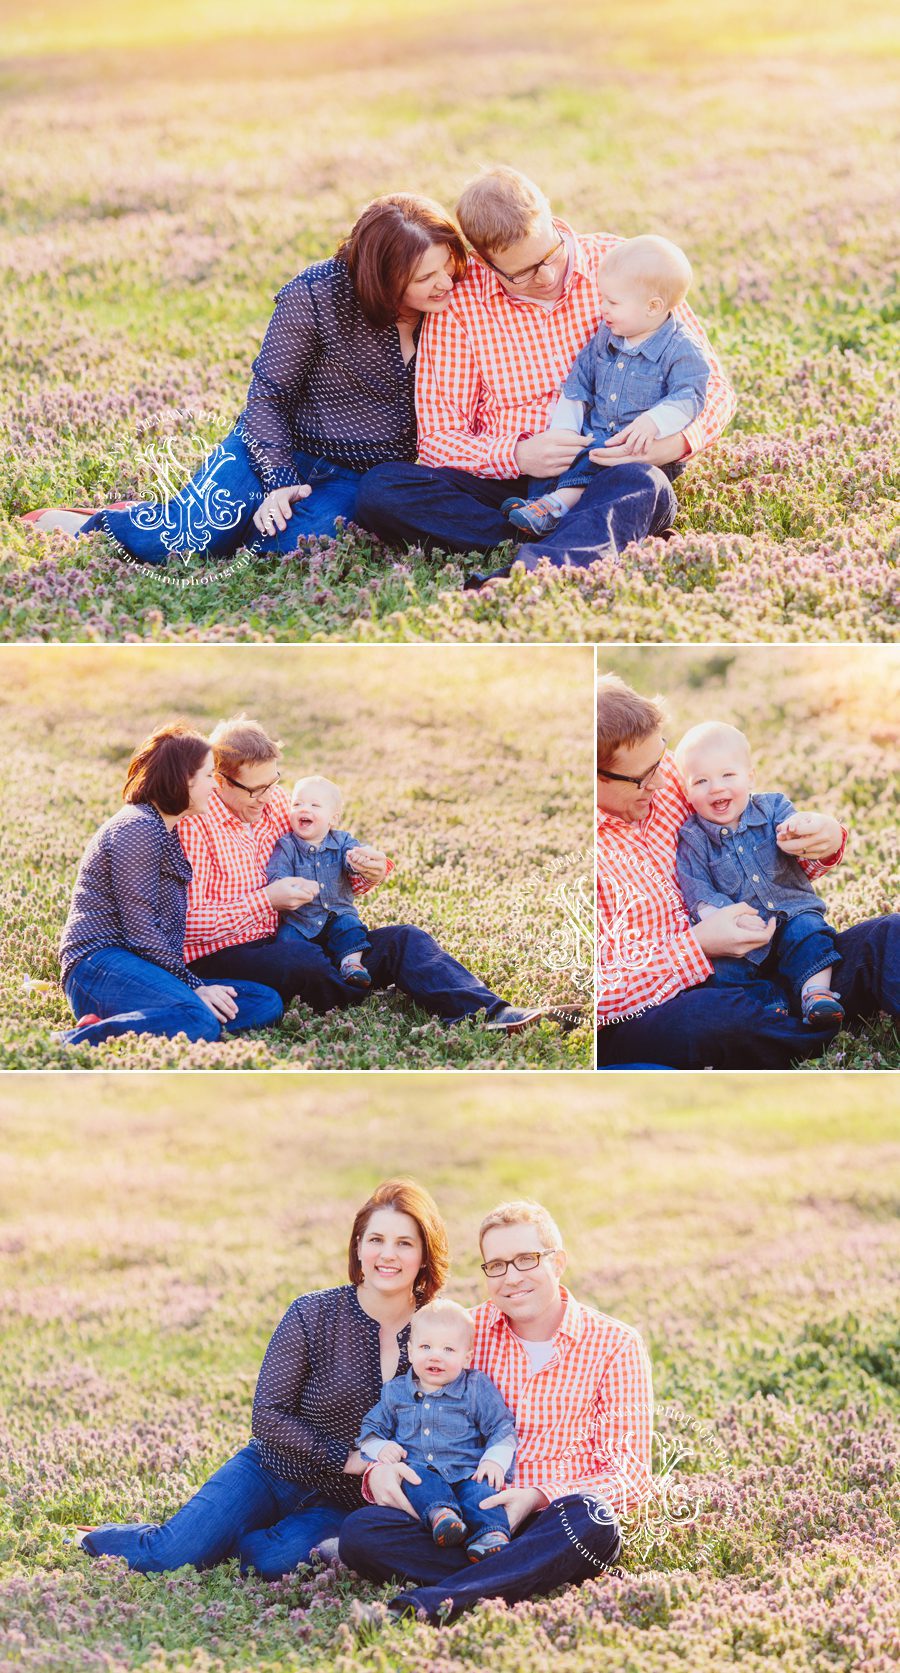 Spring family photography in Bishop, GA in a field of flowers by Yvonne Niemann Photography.